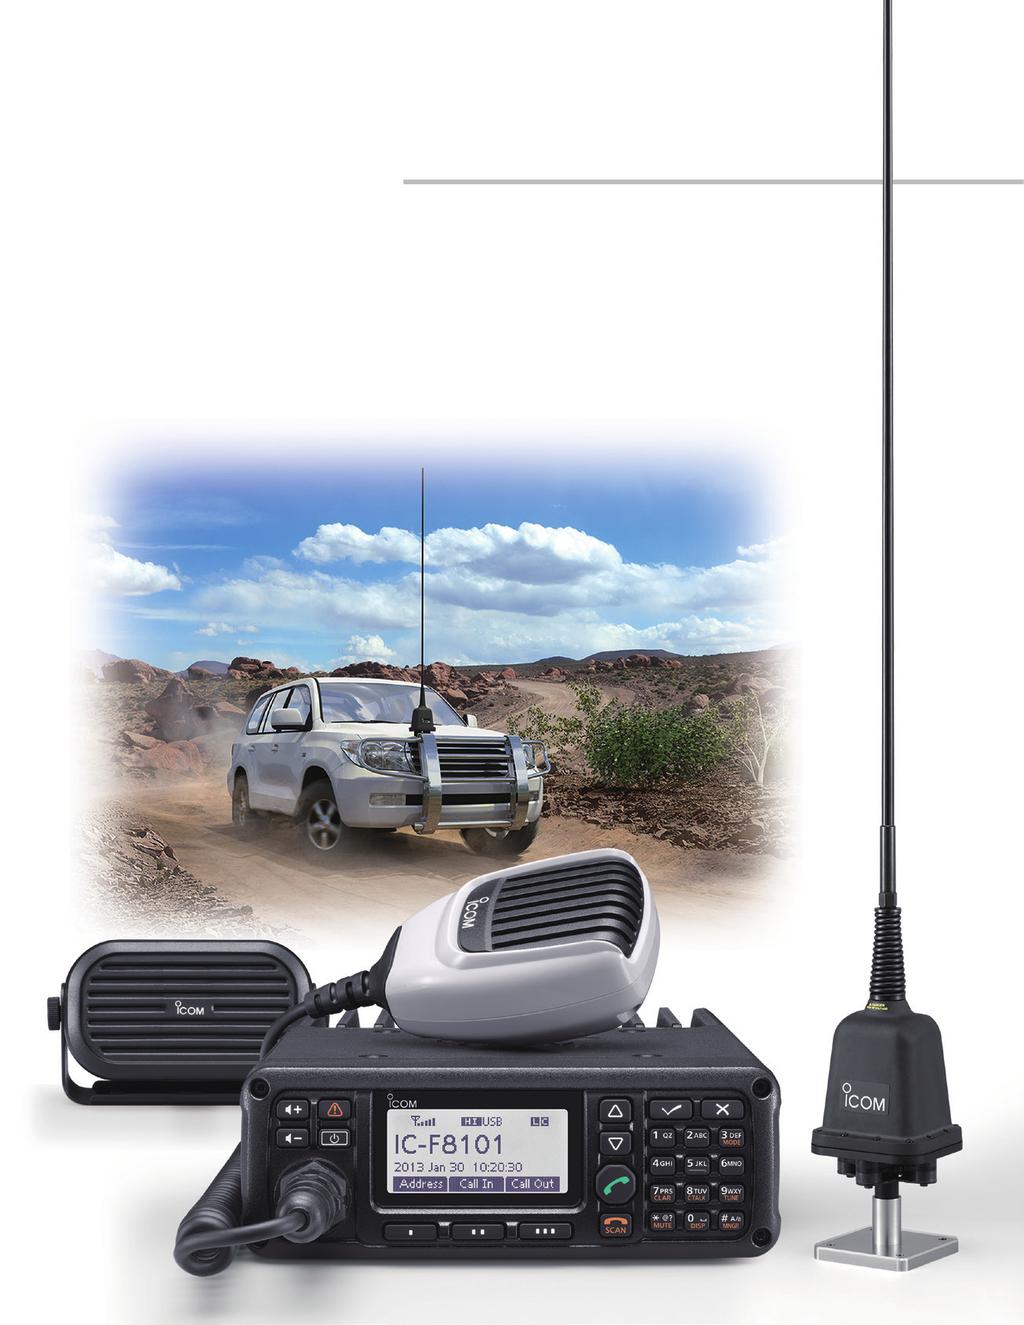 HF TRANSCEIVER AUTOMATIC TUNING ANTENNAS Wide frequency type Compact type HF Over-the-Horizon Communications Free voice, fax,